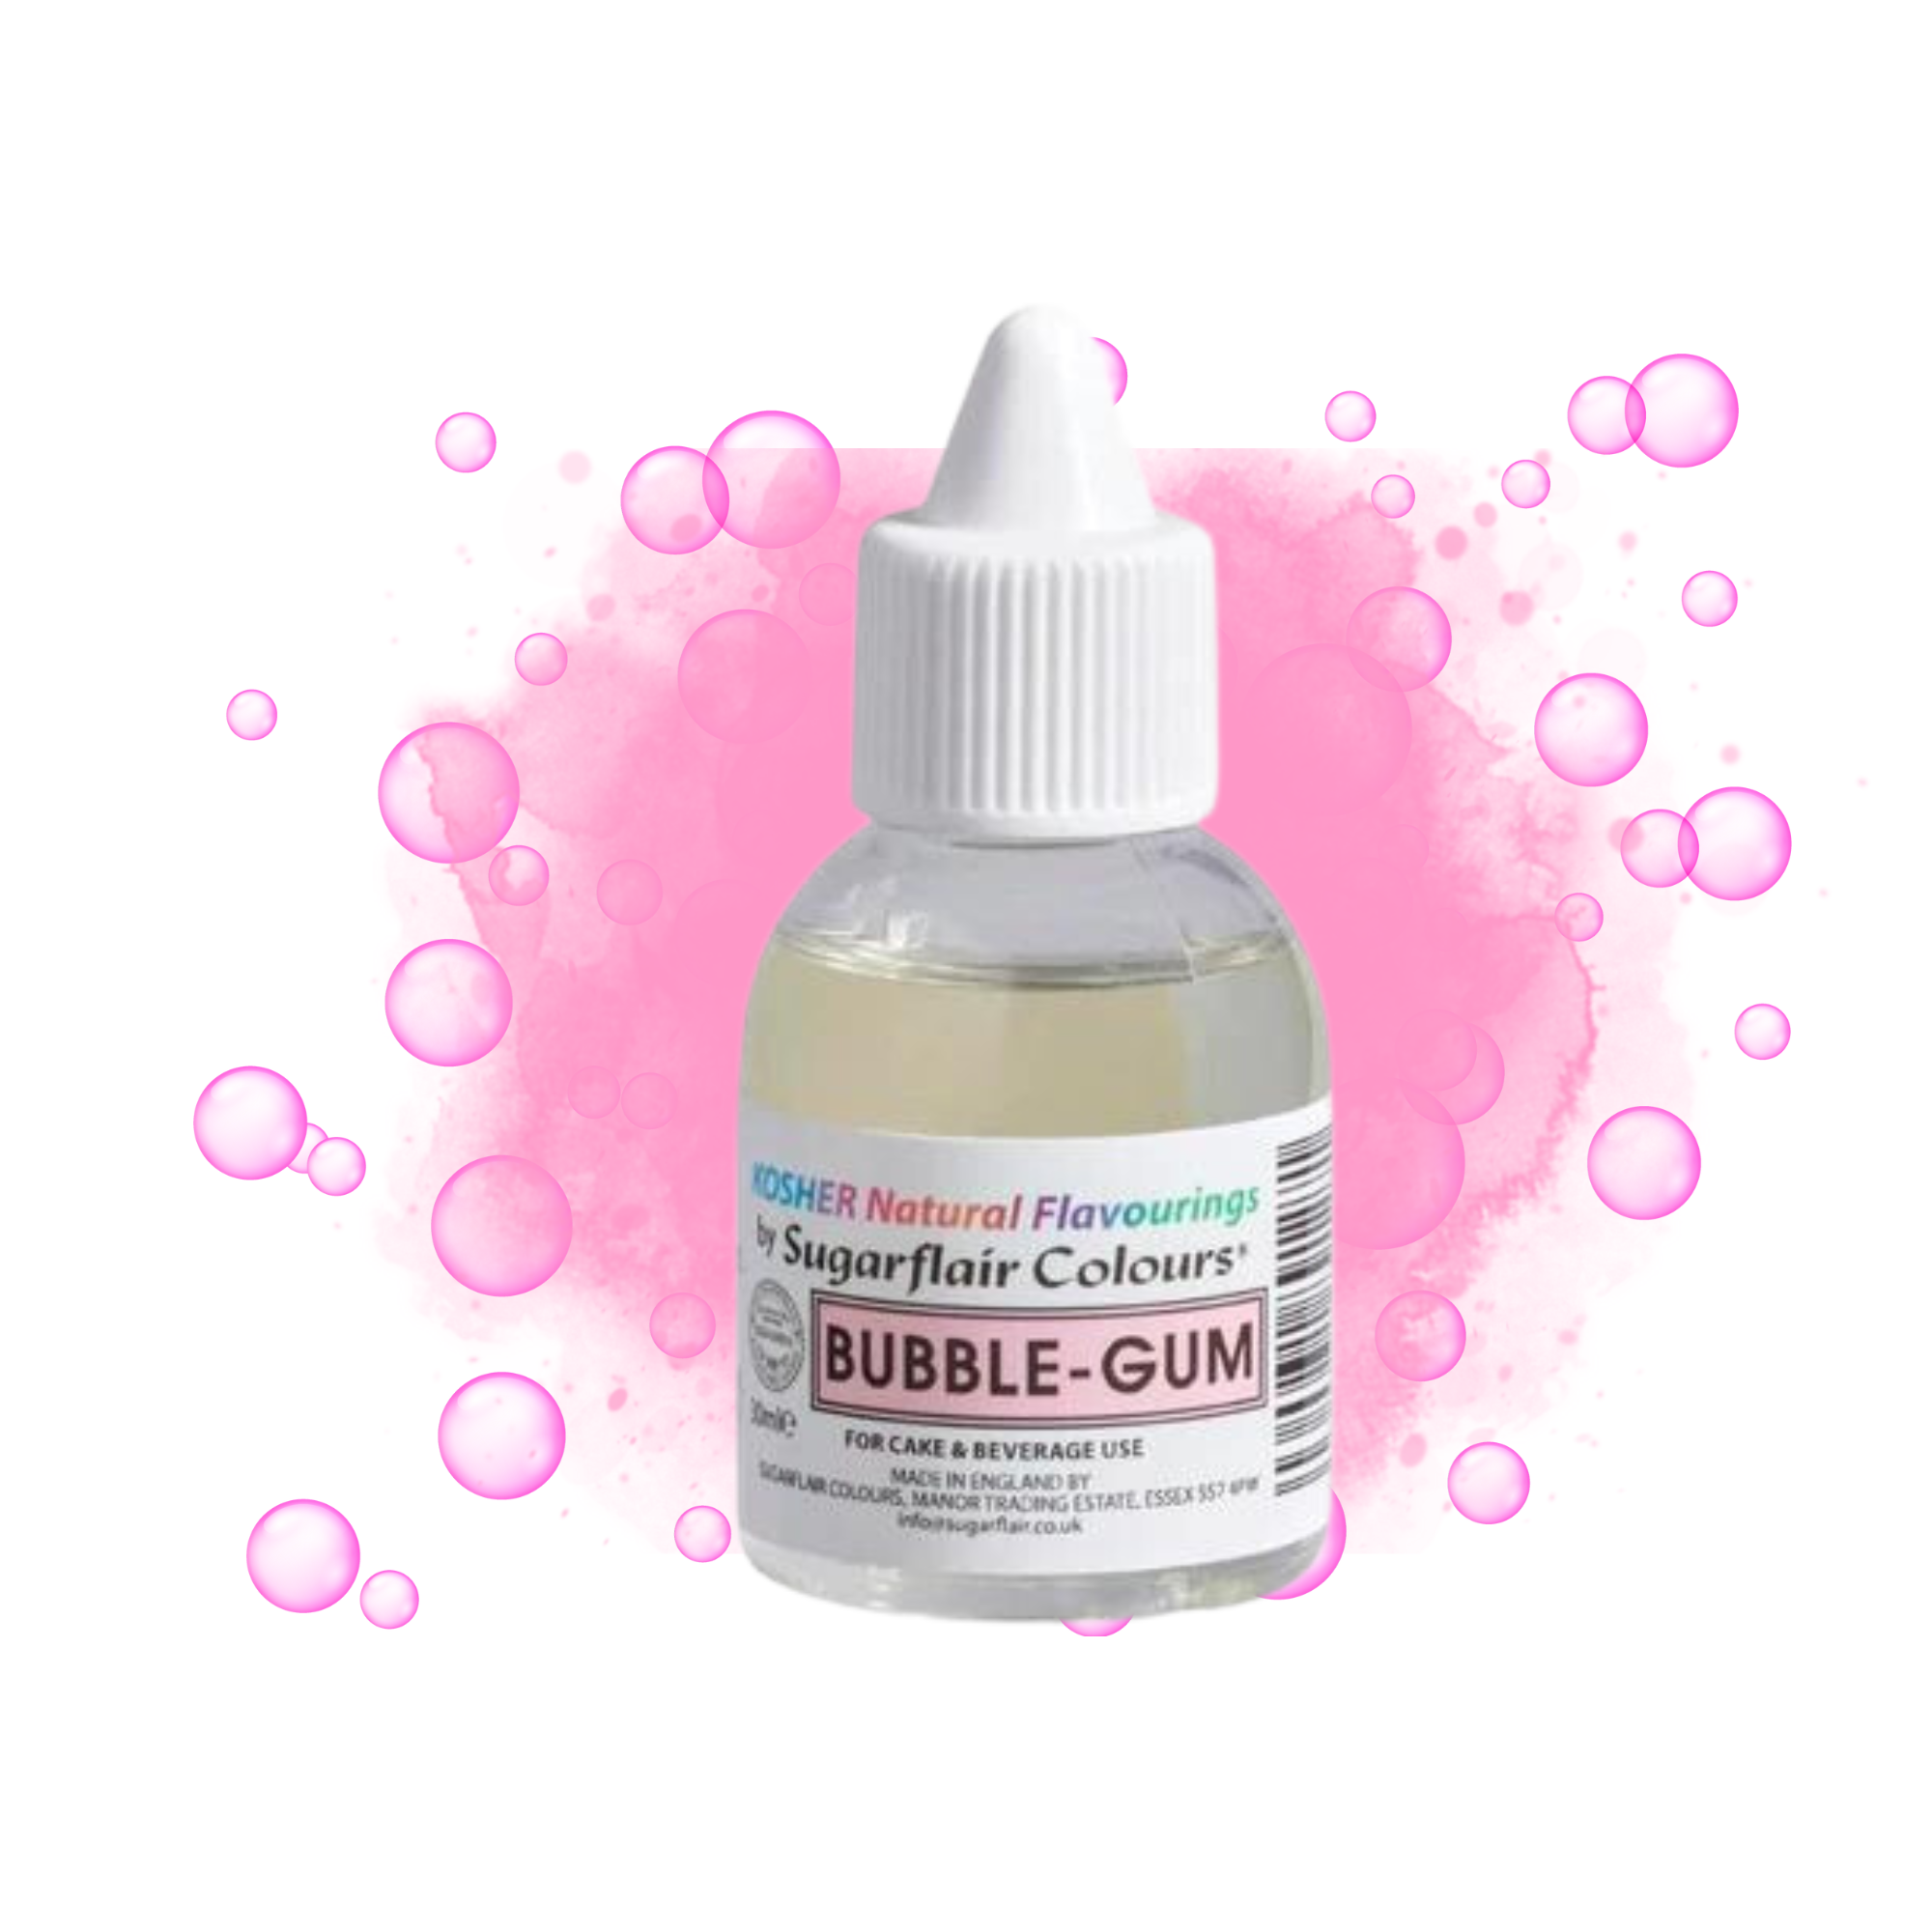 Sugarflair Bubble-Gum - Kosher Concentrated Natural Flavour / Food Flavouring 30ml